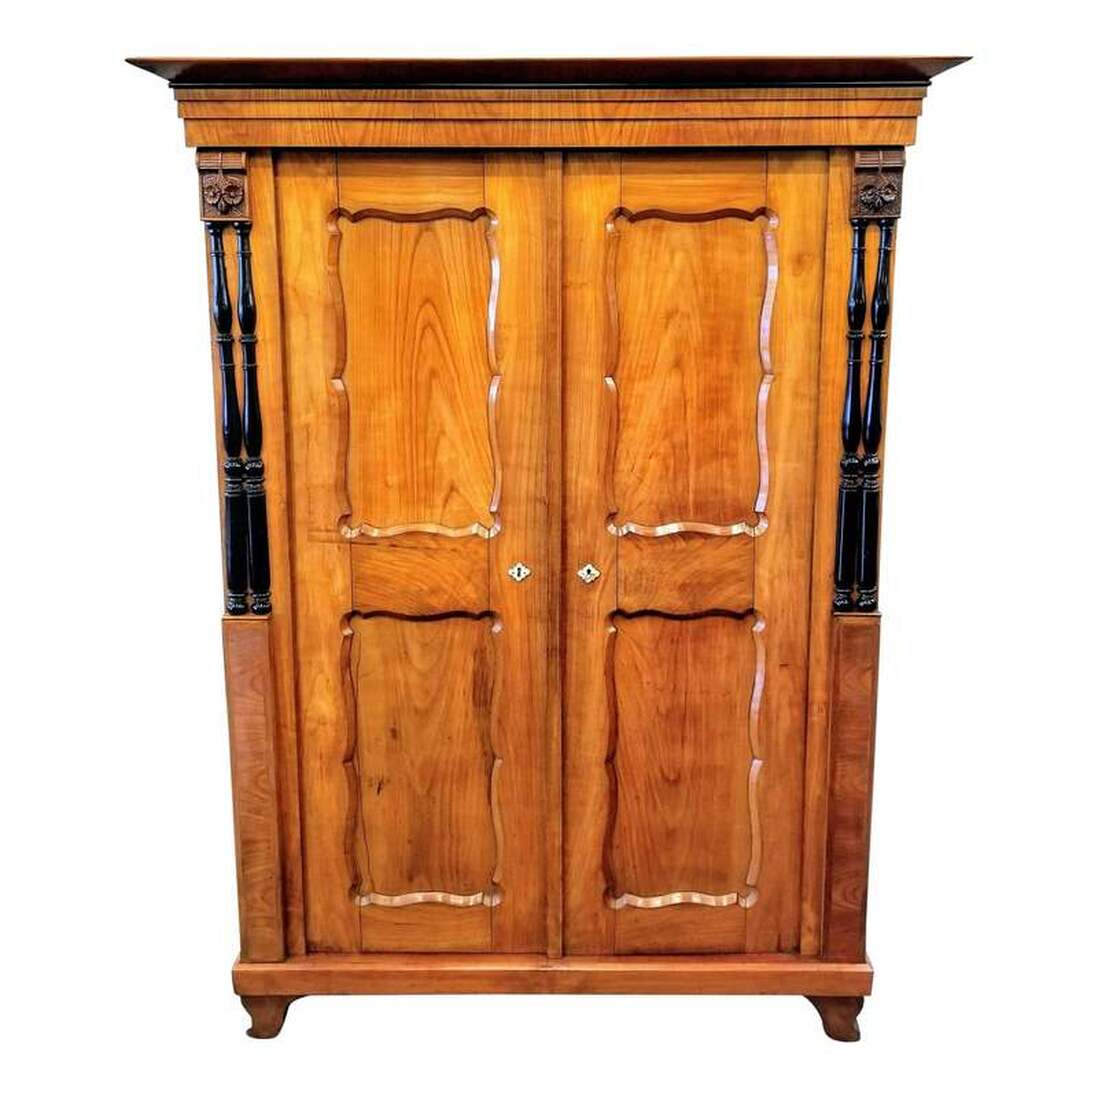 Biedermeier style armoire / linen press / wardrobe from circa the 1830s is constructed of hand-planed cherry wood. Adding interest are two carved bone key escutcheons, central stringing inlay, ebonized balusters, and carved floral applications.